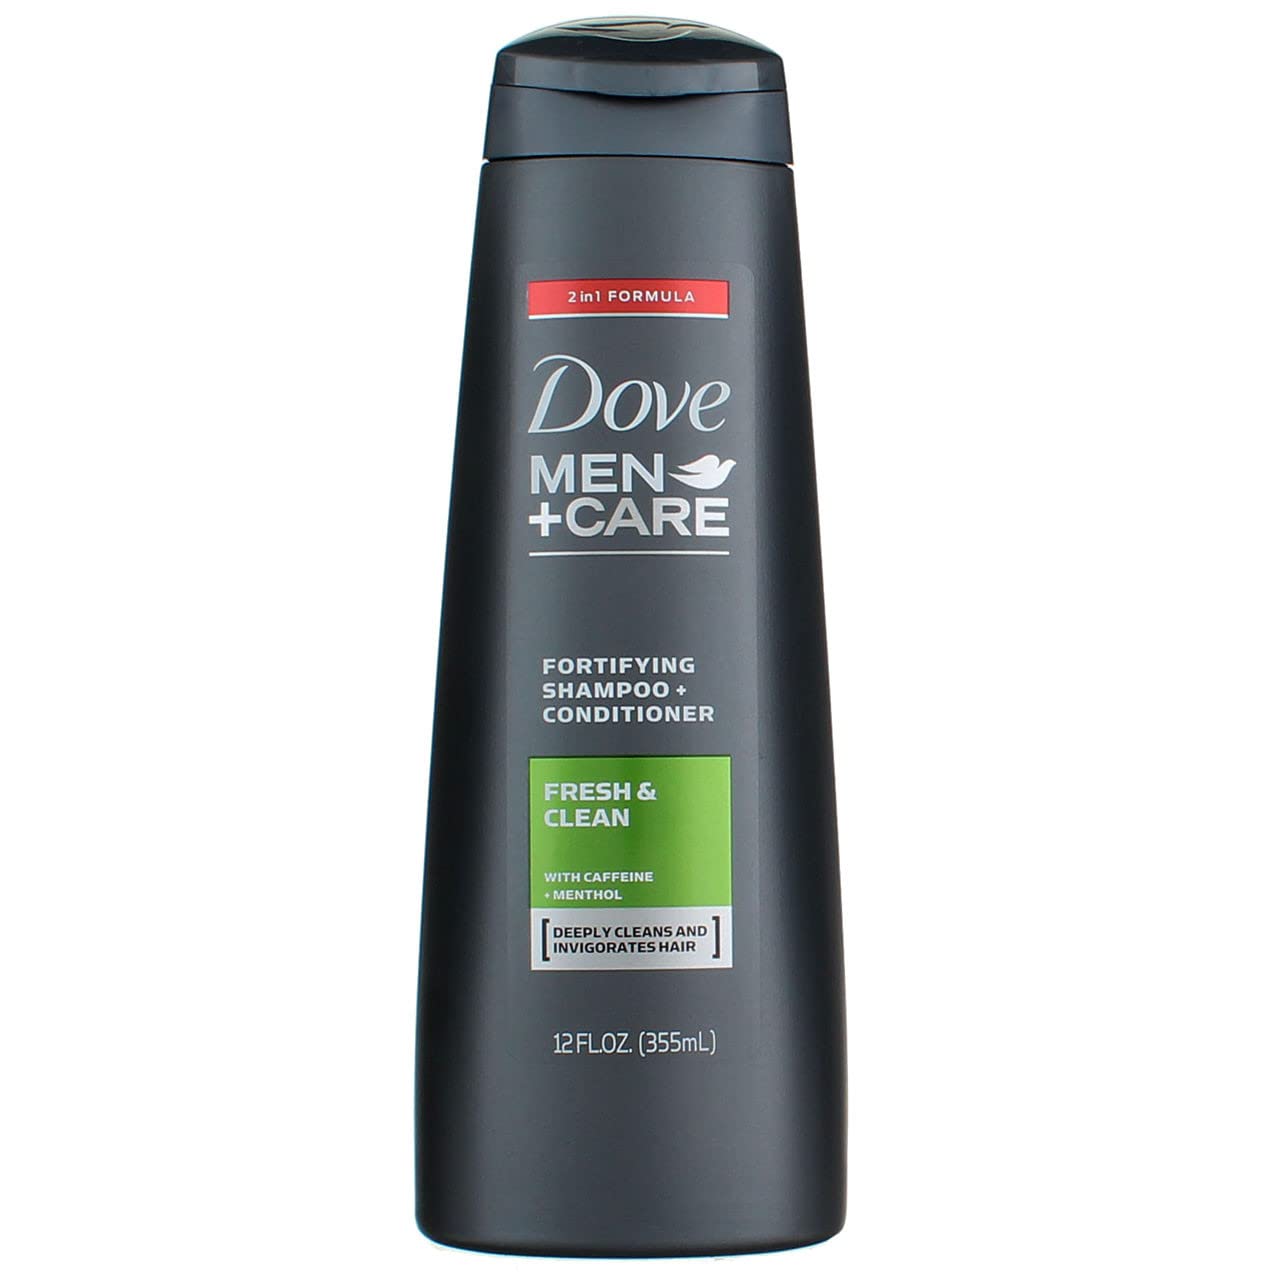 Dove Men+Care Fortifying 2 in 1 Shampoo and Conditioner, Fresh and Clean for Normal to Oily Hair with Caffeine and Menthol to Help Strengthen & Nourish Hair, 12 fl oz, Pack of 6